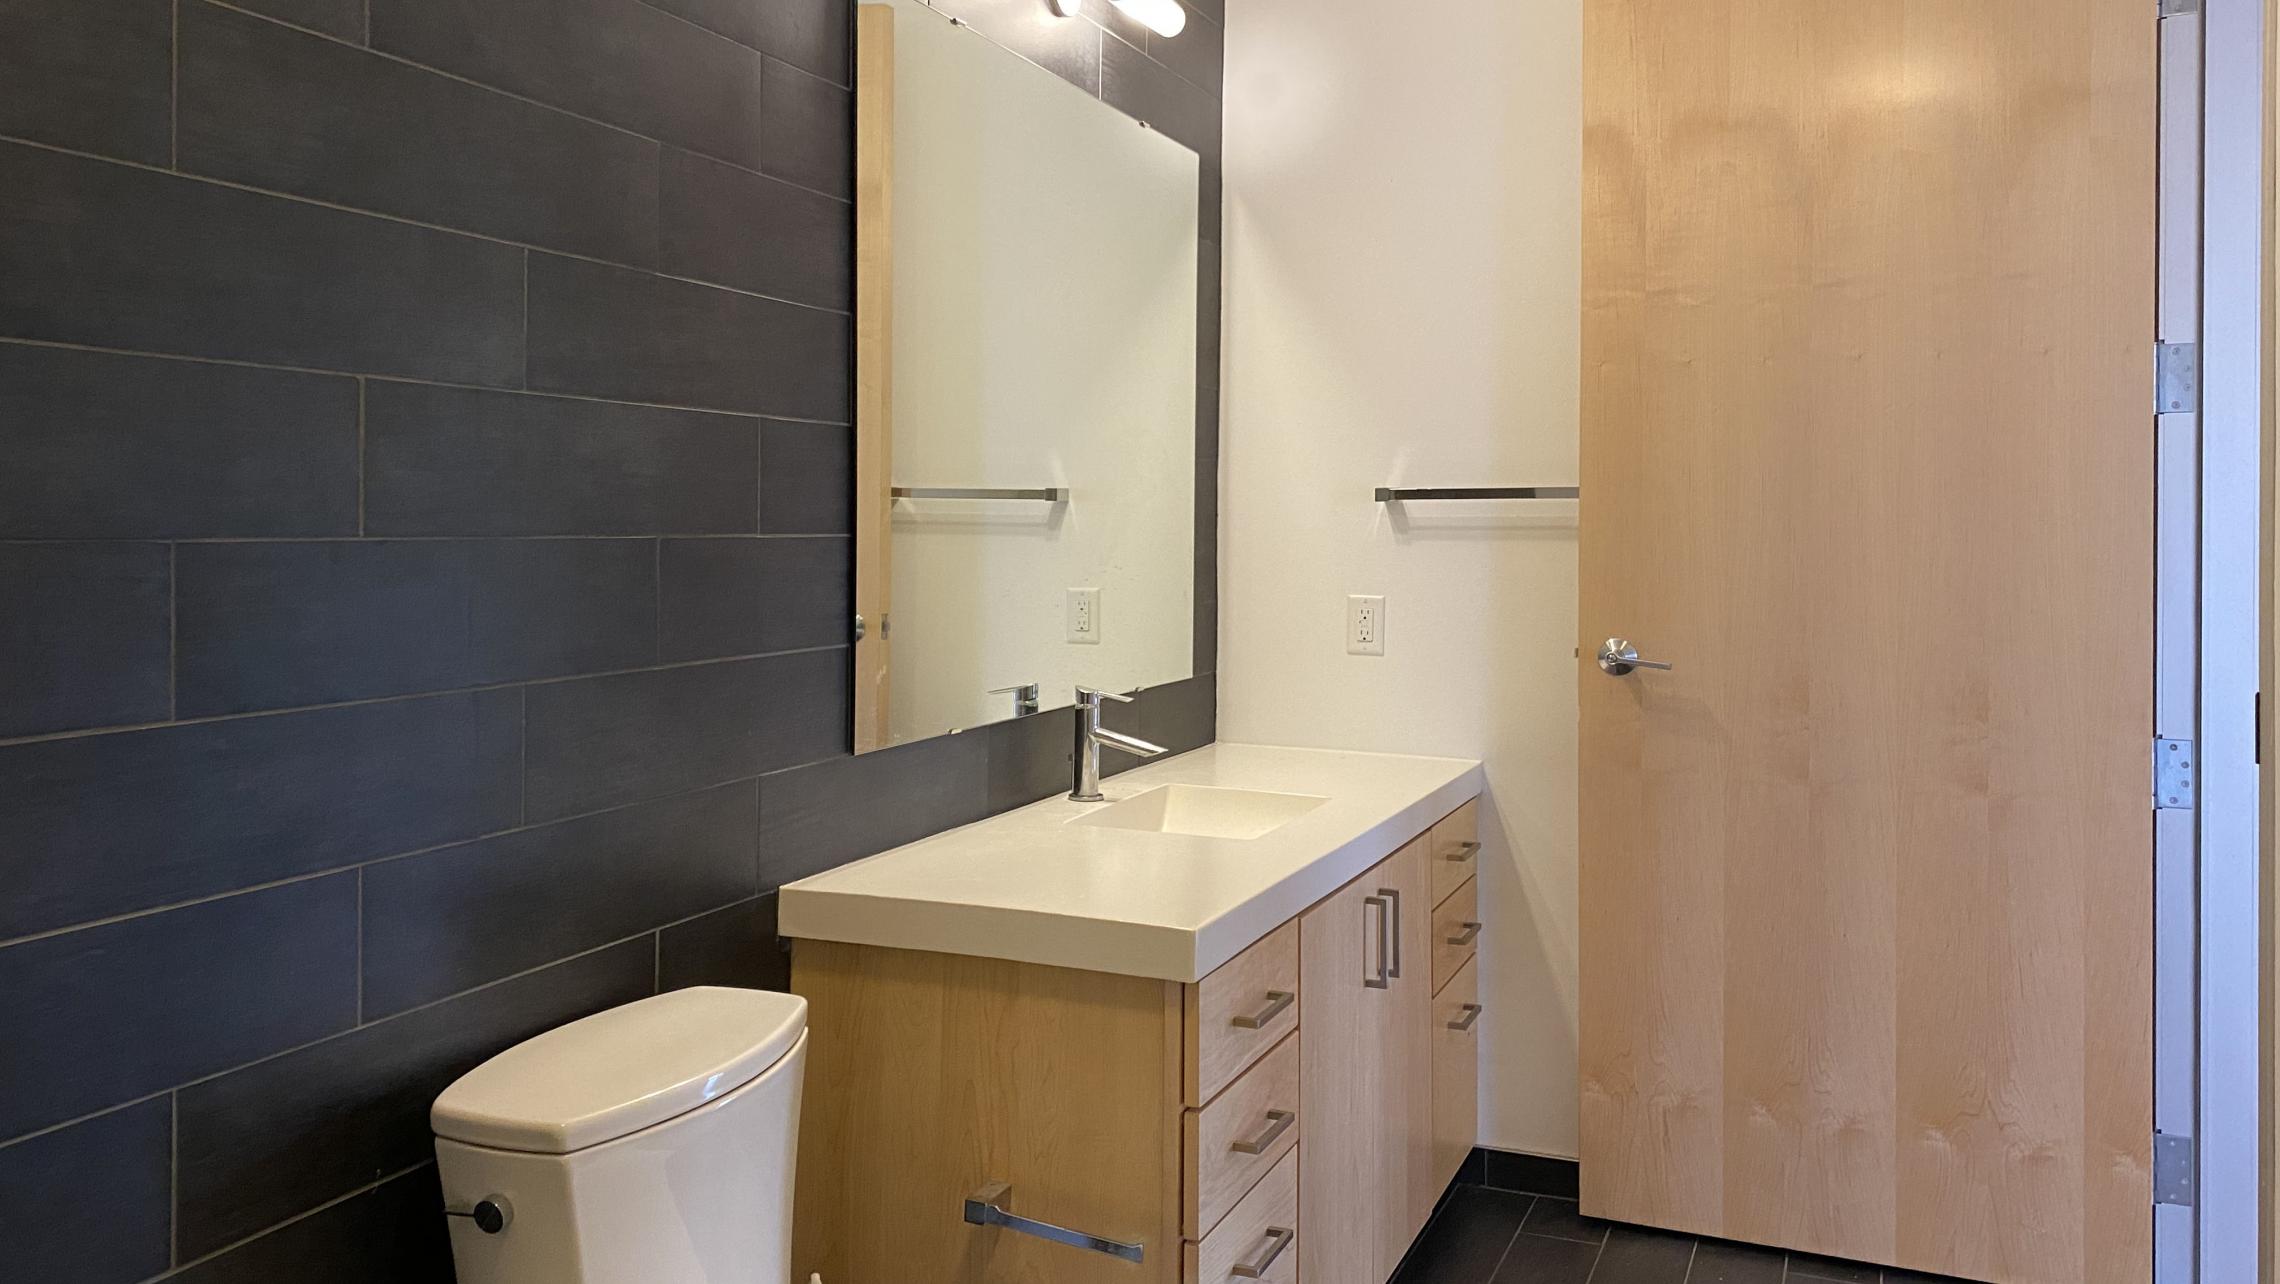 SEVEN27-Apartment-218-One-Bedroom-The-Yards-Modern-Upscale-Design-Luxury-Fitness-Courtyard-Lougne-Pets-Living-Kitchen-Downtown-Madison-Lake-Capitol-Lifestyle